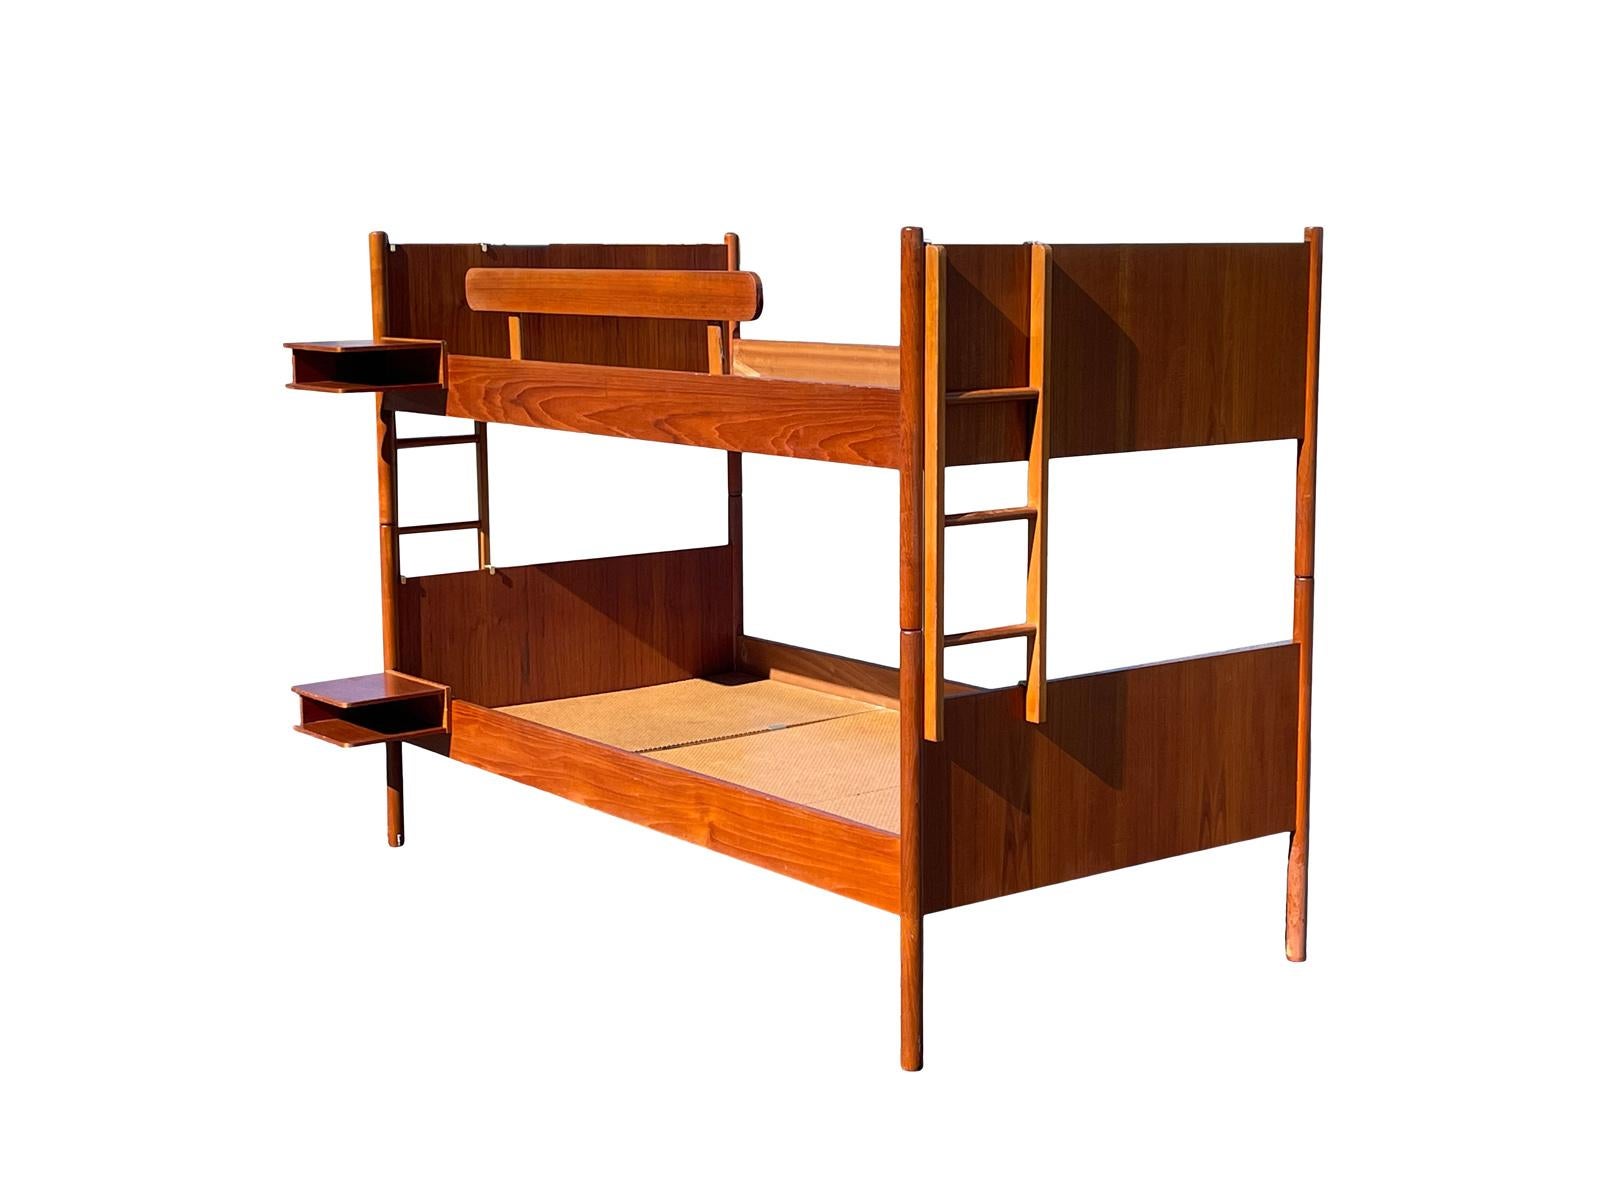 Complete danish teak bunk bed set very easily assembled great condition includes 2 rearrangeable ladders and 2 shelves 